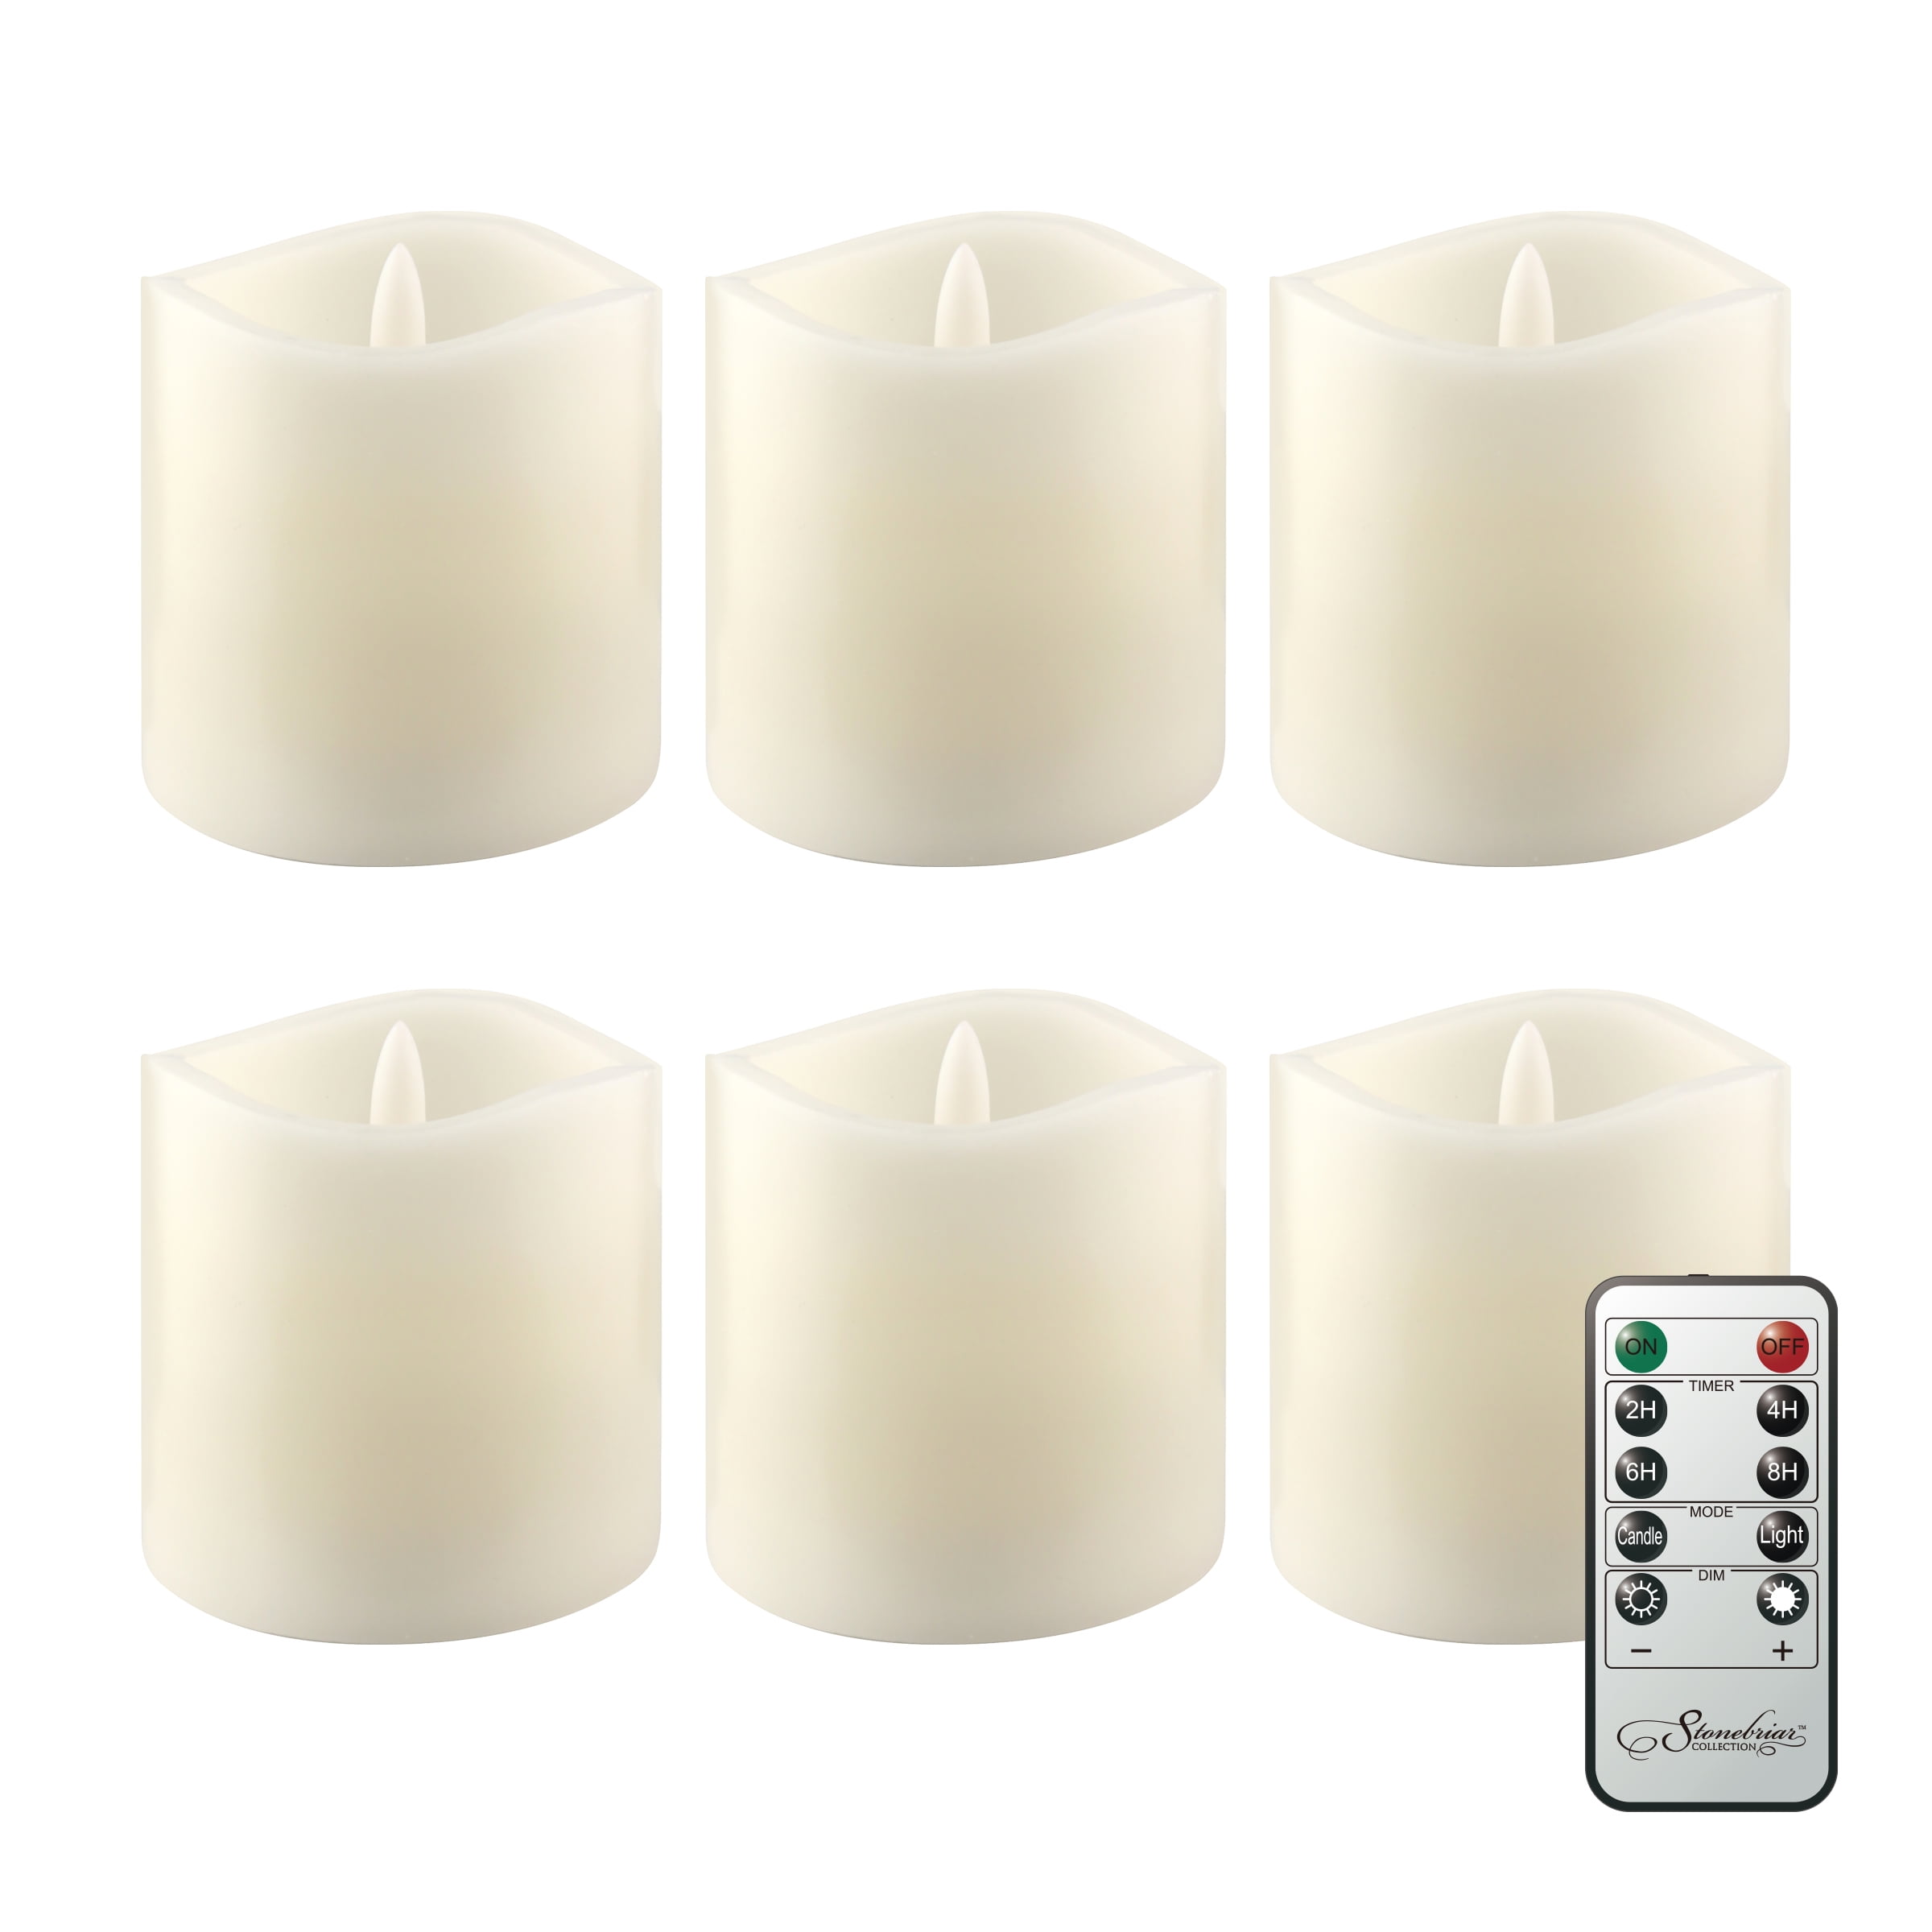 Ivory Wax Moving Wick Flameless Candle Fireless Pillar Timer Remote Set of 3 LED 